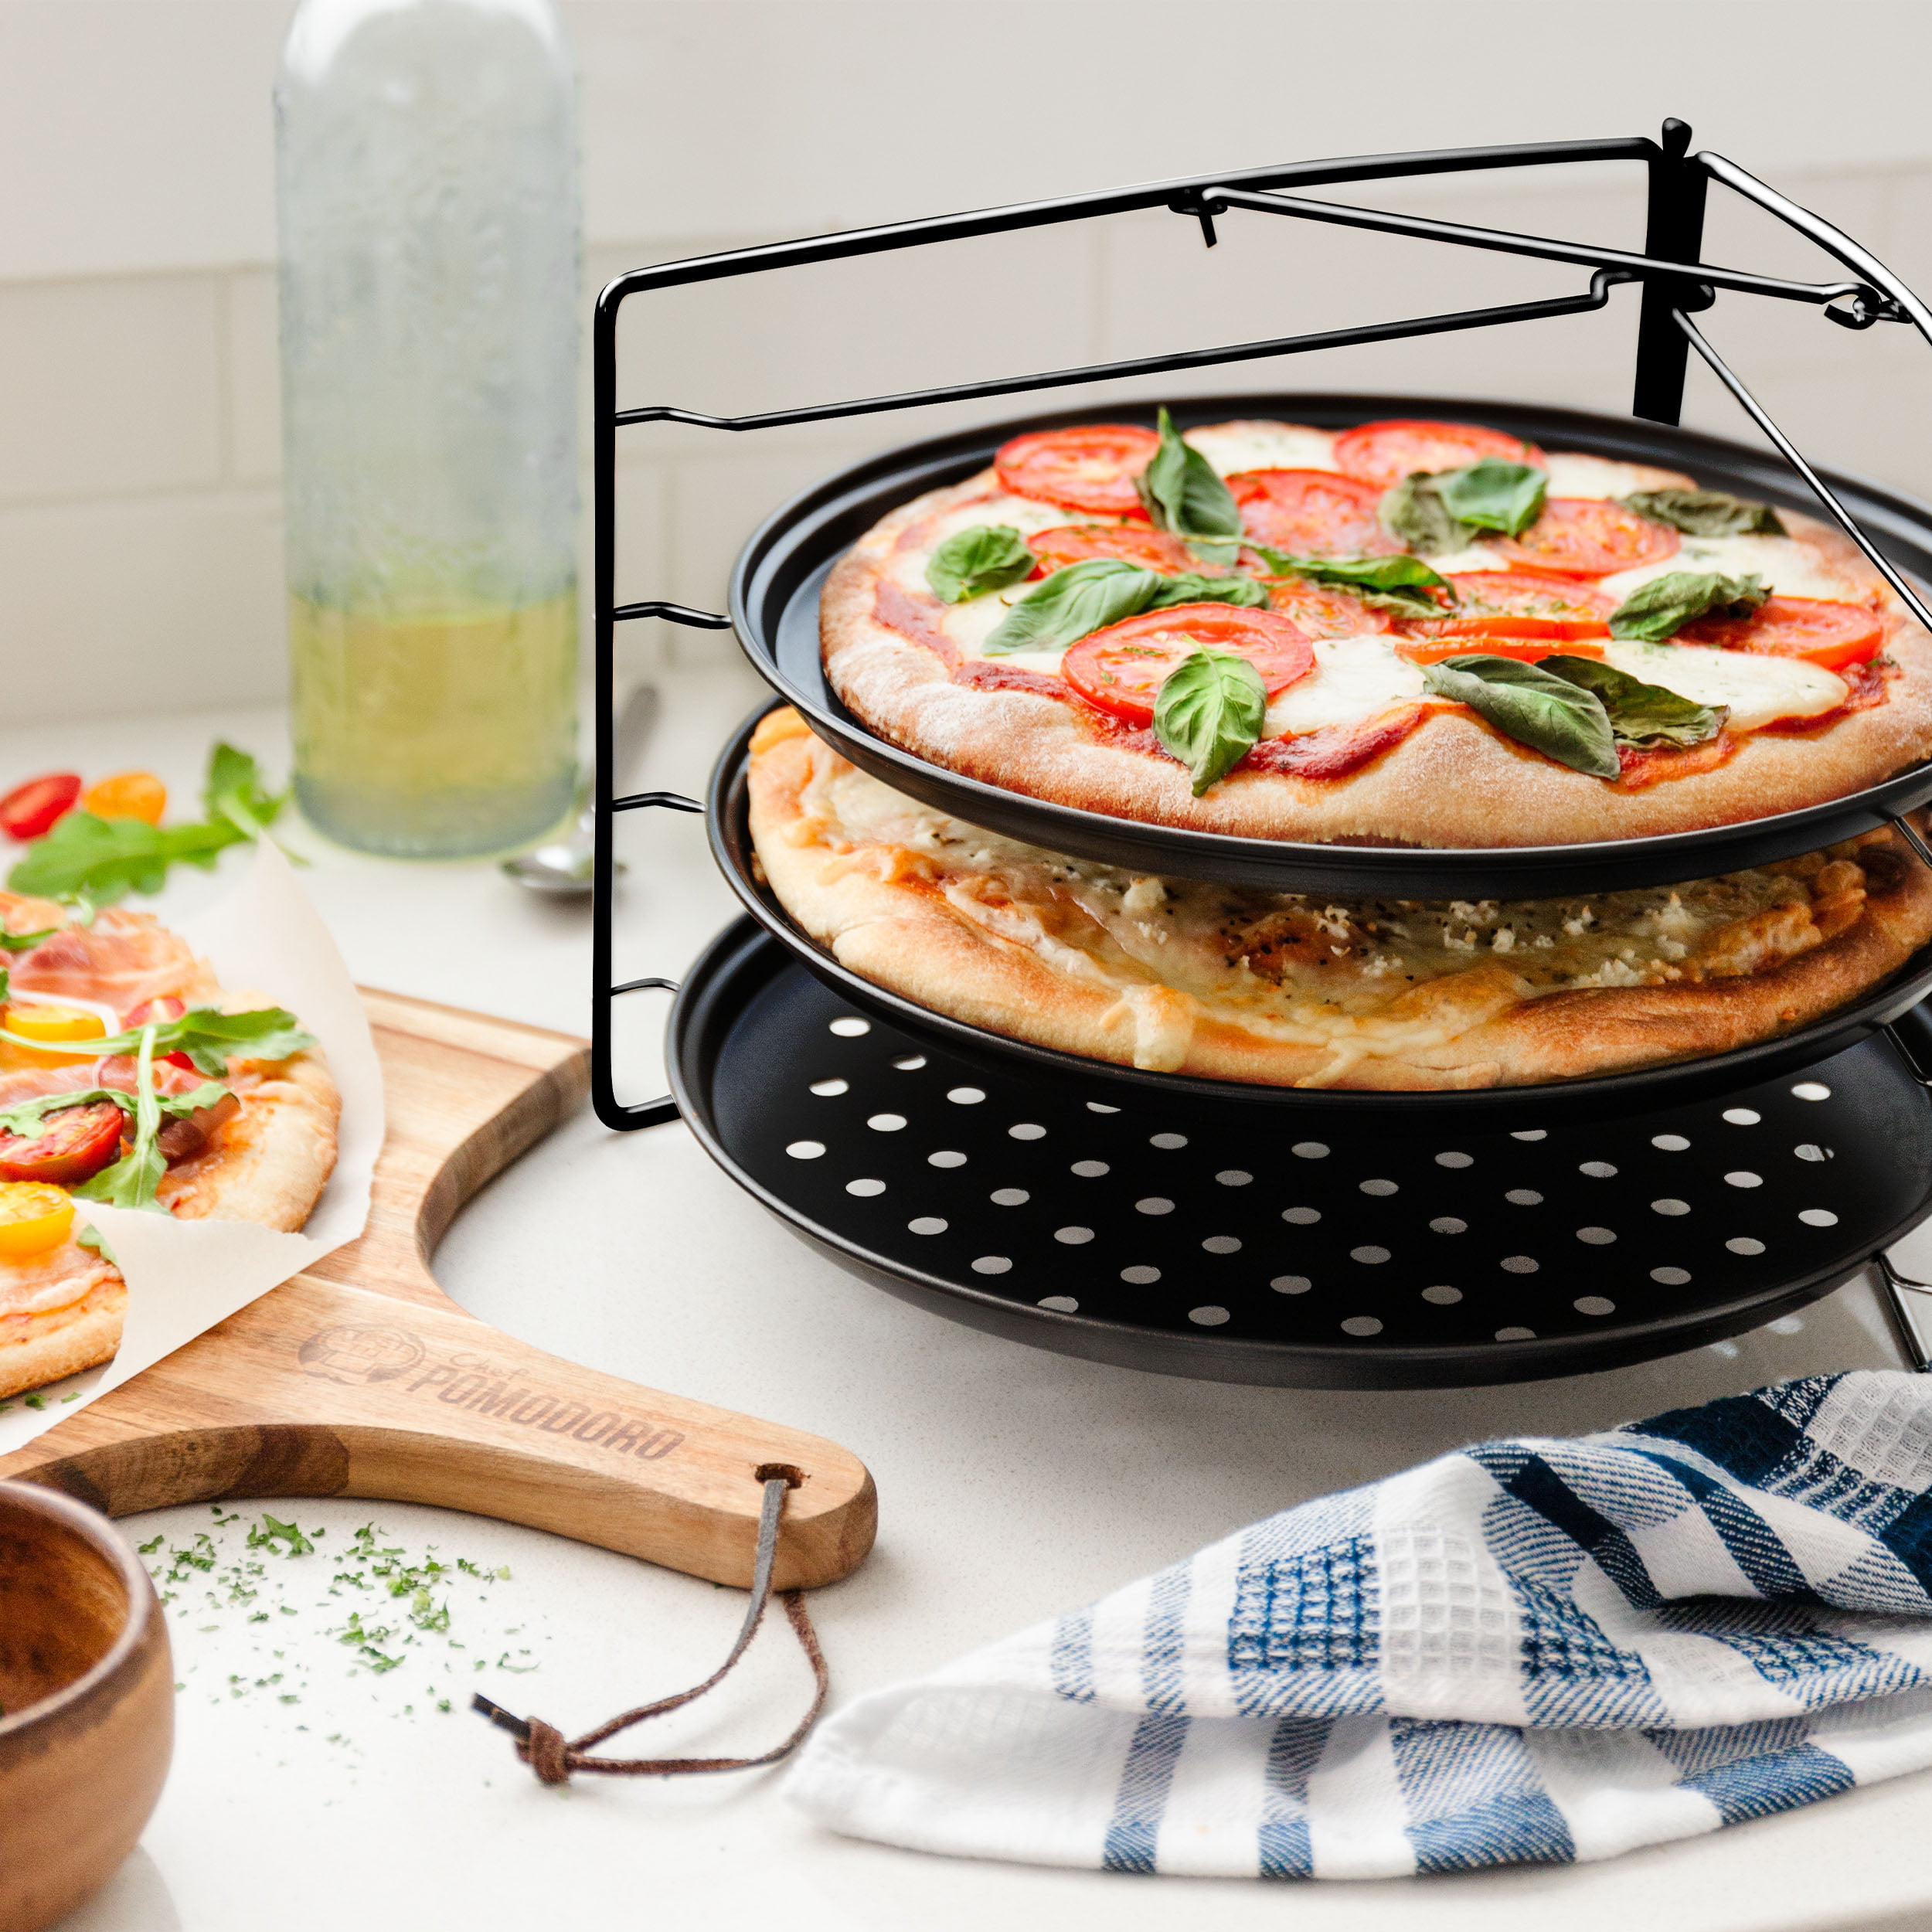 Chef Pomodoro Cast Iron Pizza Pan, Pre-Seasoned Skillet with Handles,  Baking Pan, Round Griddle for Dosa Tawa Roti, Comal for Tortillas, Baking  Stove